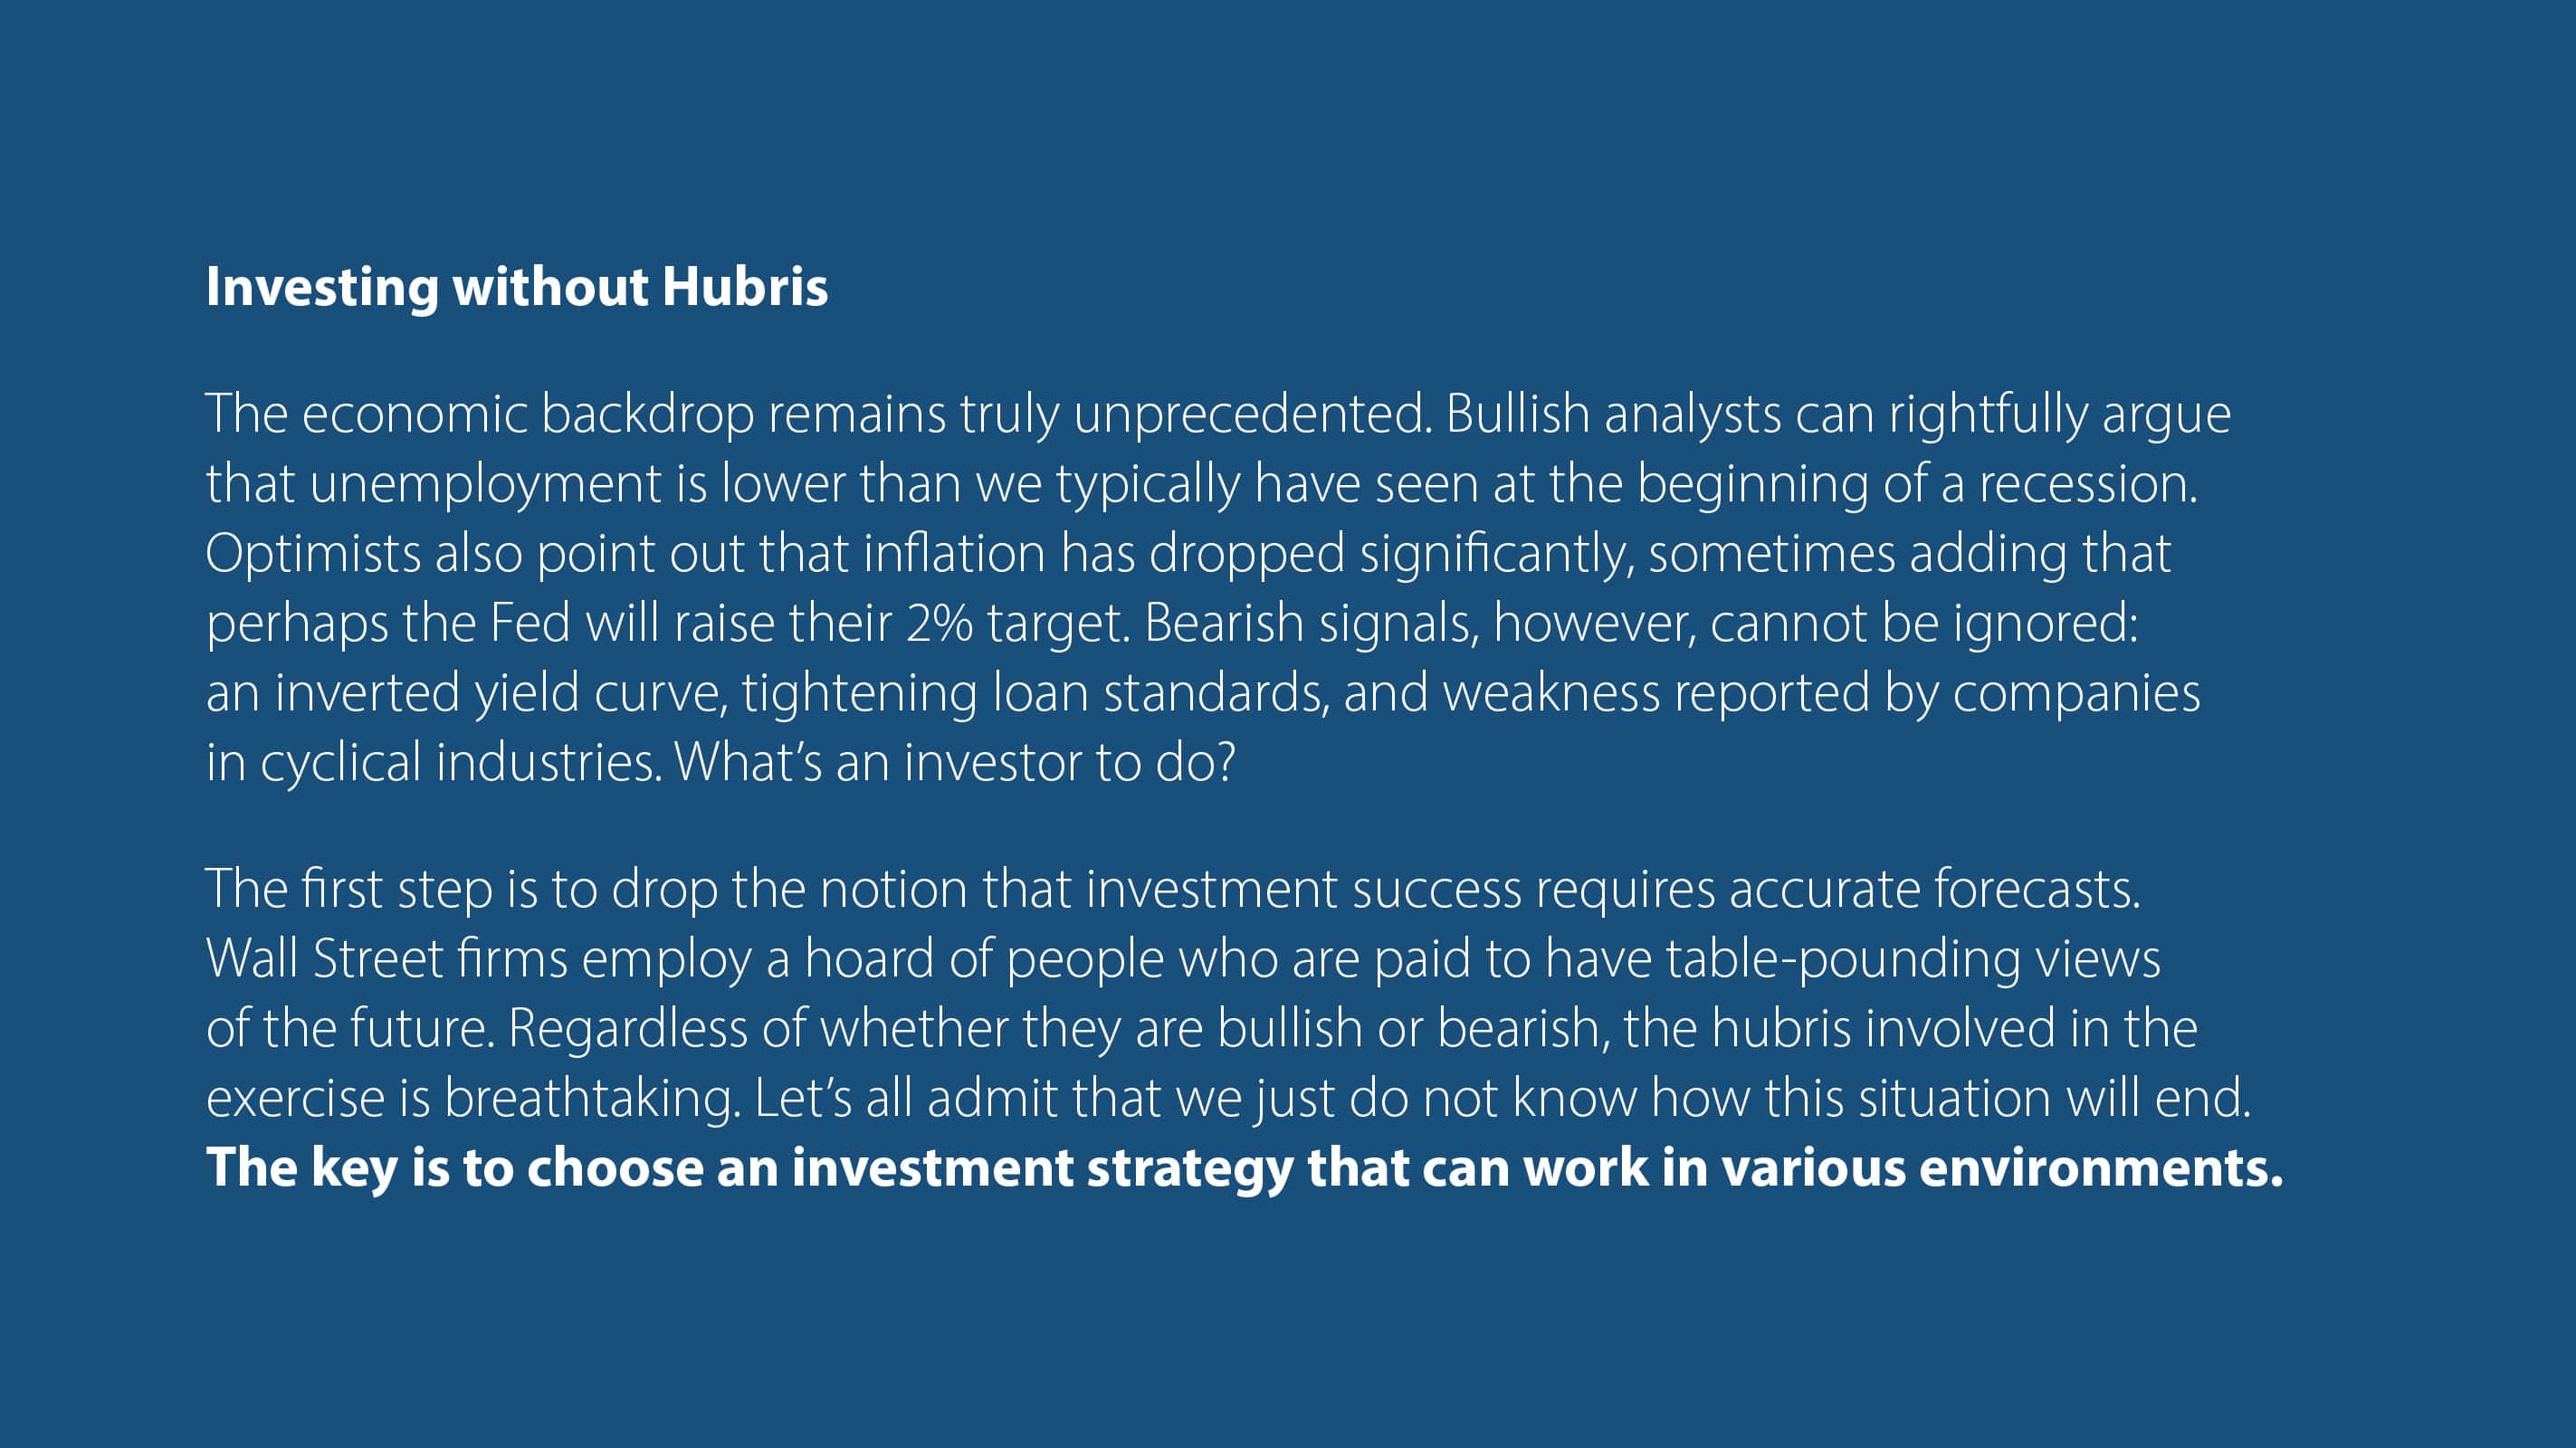 Investing without Hubris